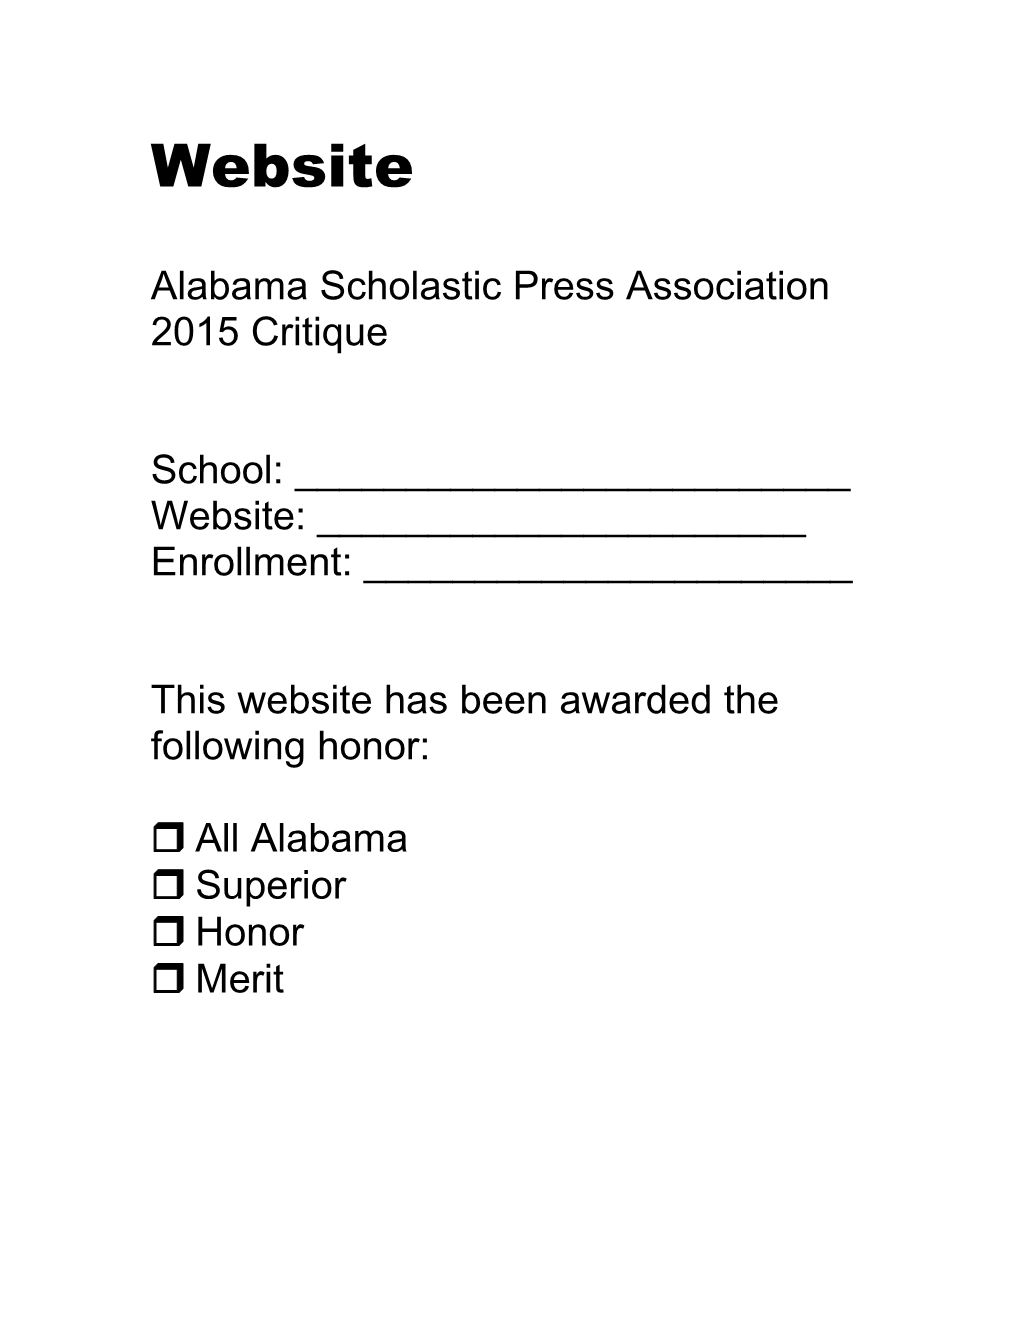 This Website Has Been Awarded the Following Honor